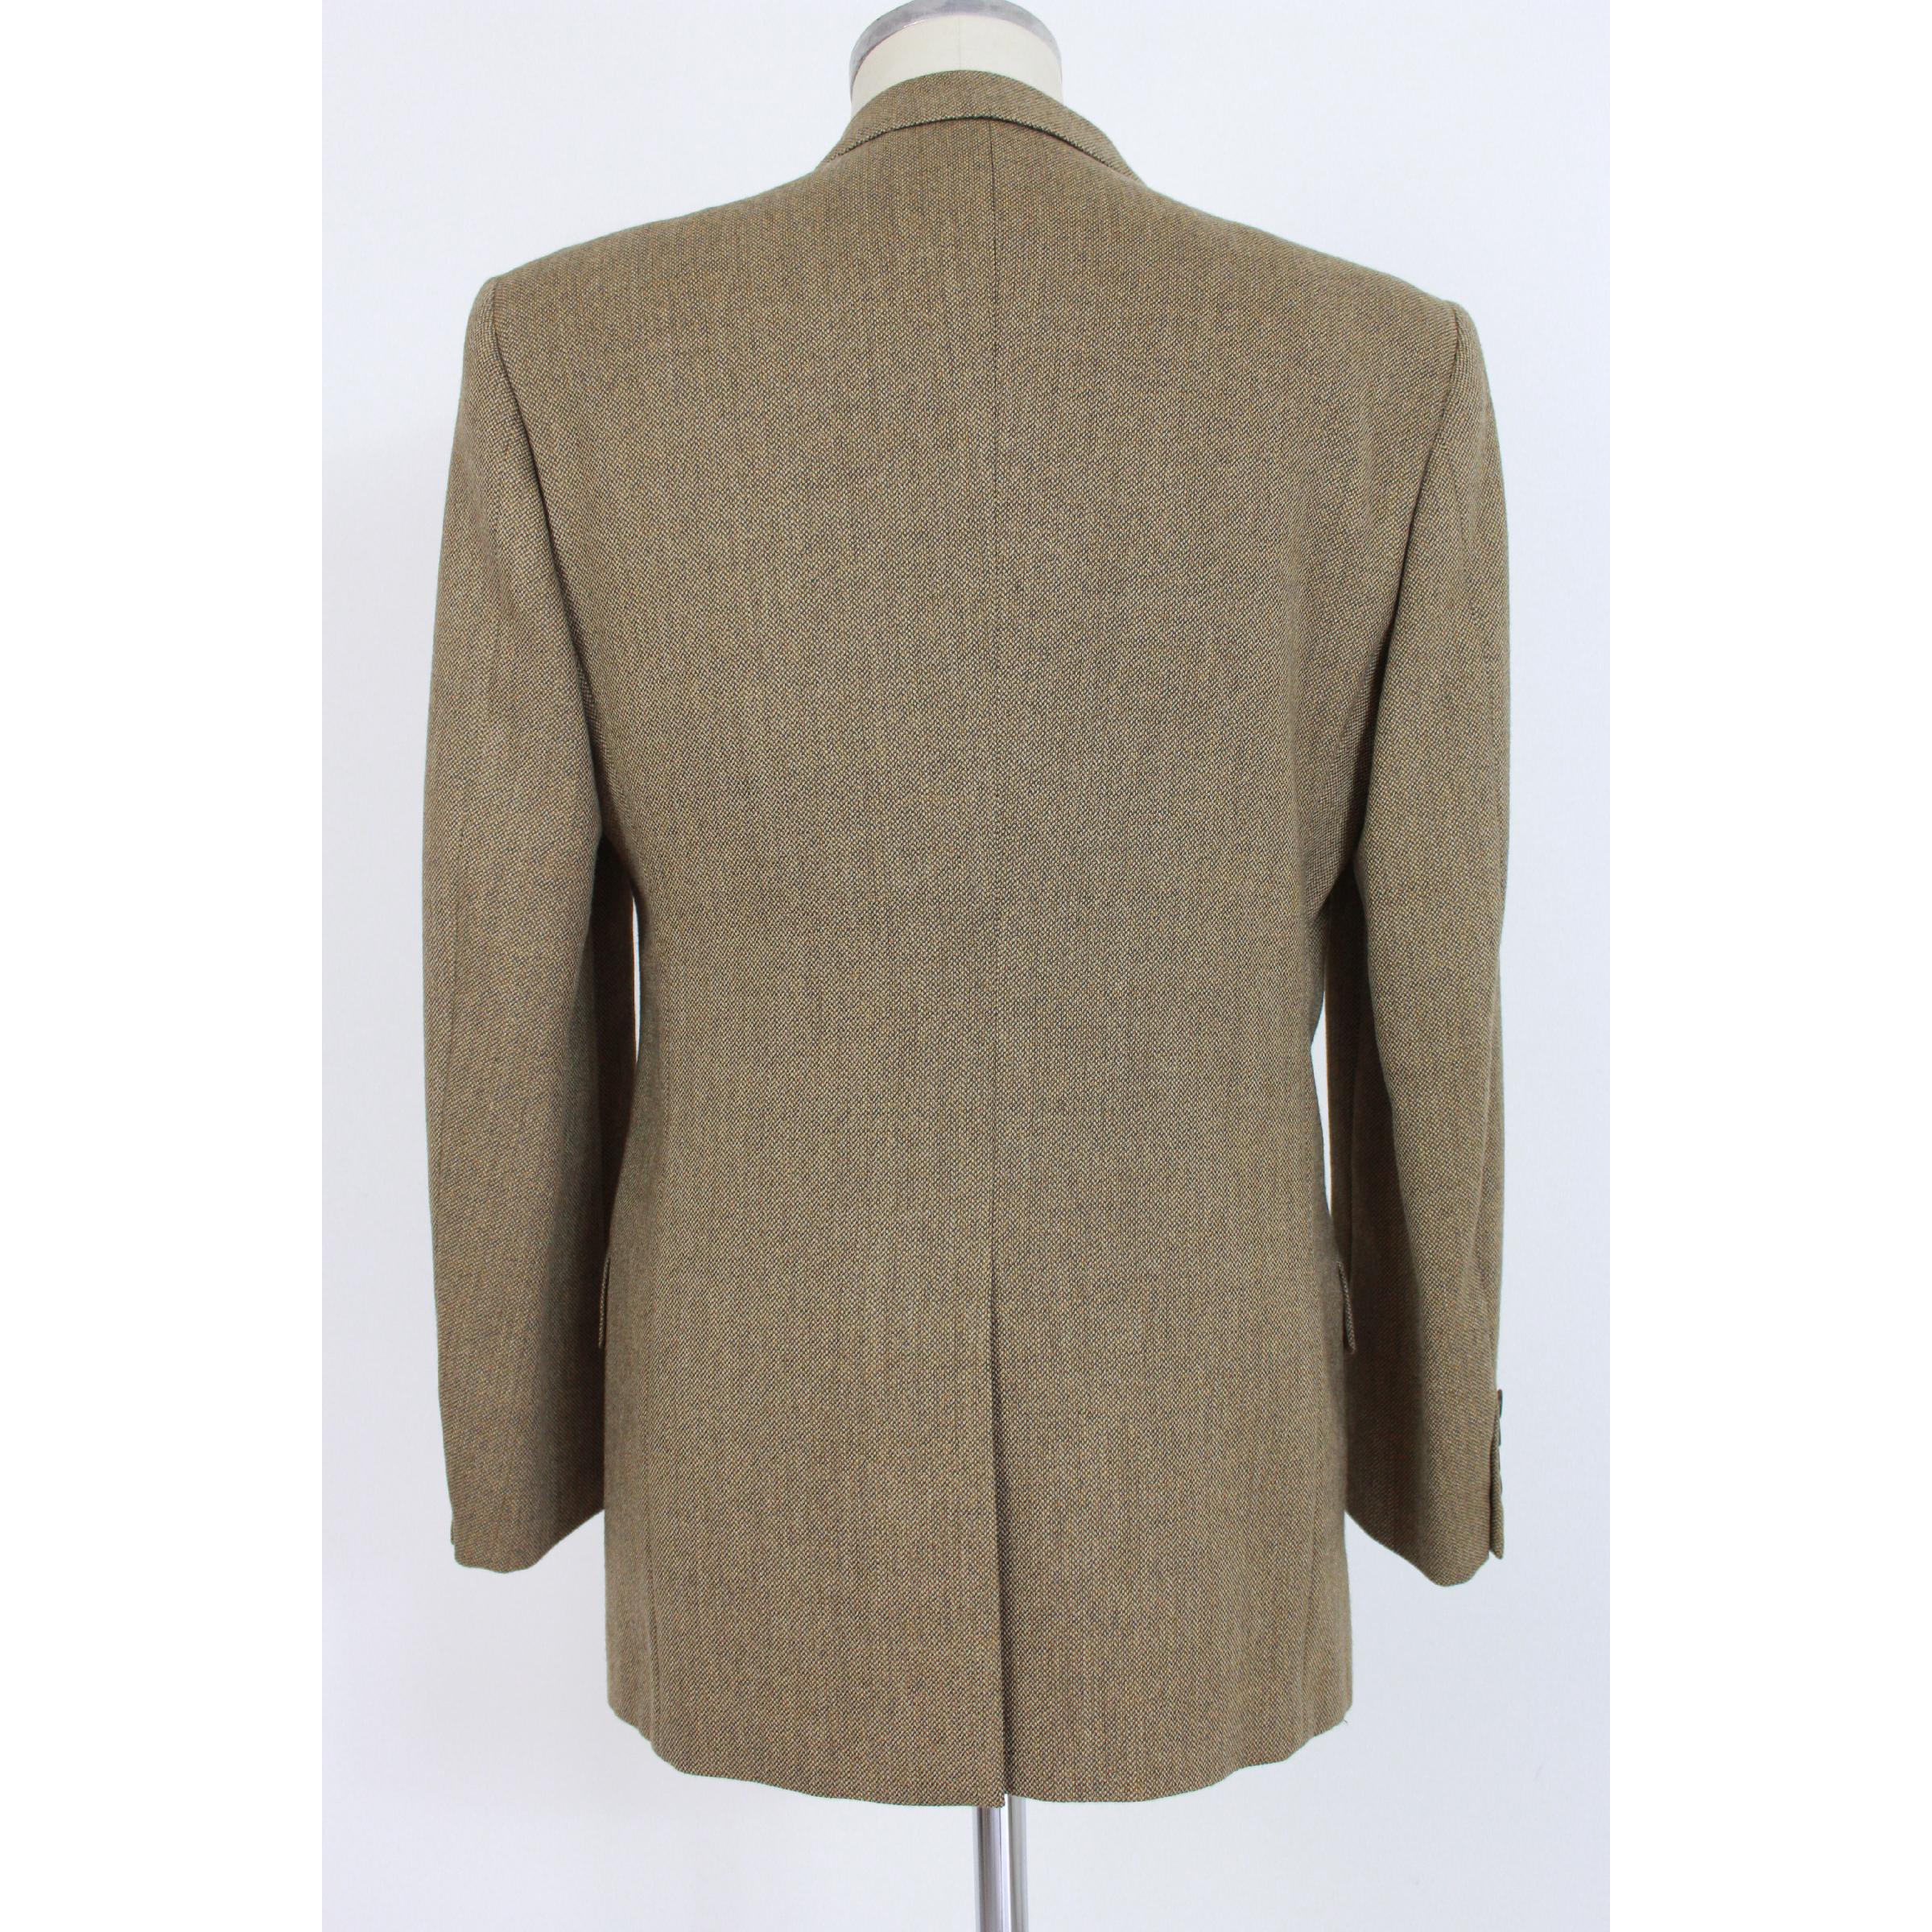 Vintage Emanuel Ungaro Paris men's jacket, beige and brown, 100% virgin wool. Classic three-button model. 90s. Made in Italy. New with tag.

Size: 48 It 38 Us 38 Uk

Shoulder: 48 cm
Bust / Chest: 53 cm
Sleeve: 64 cm
Length: 86 cm